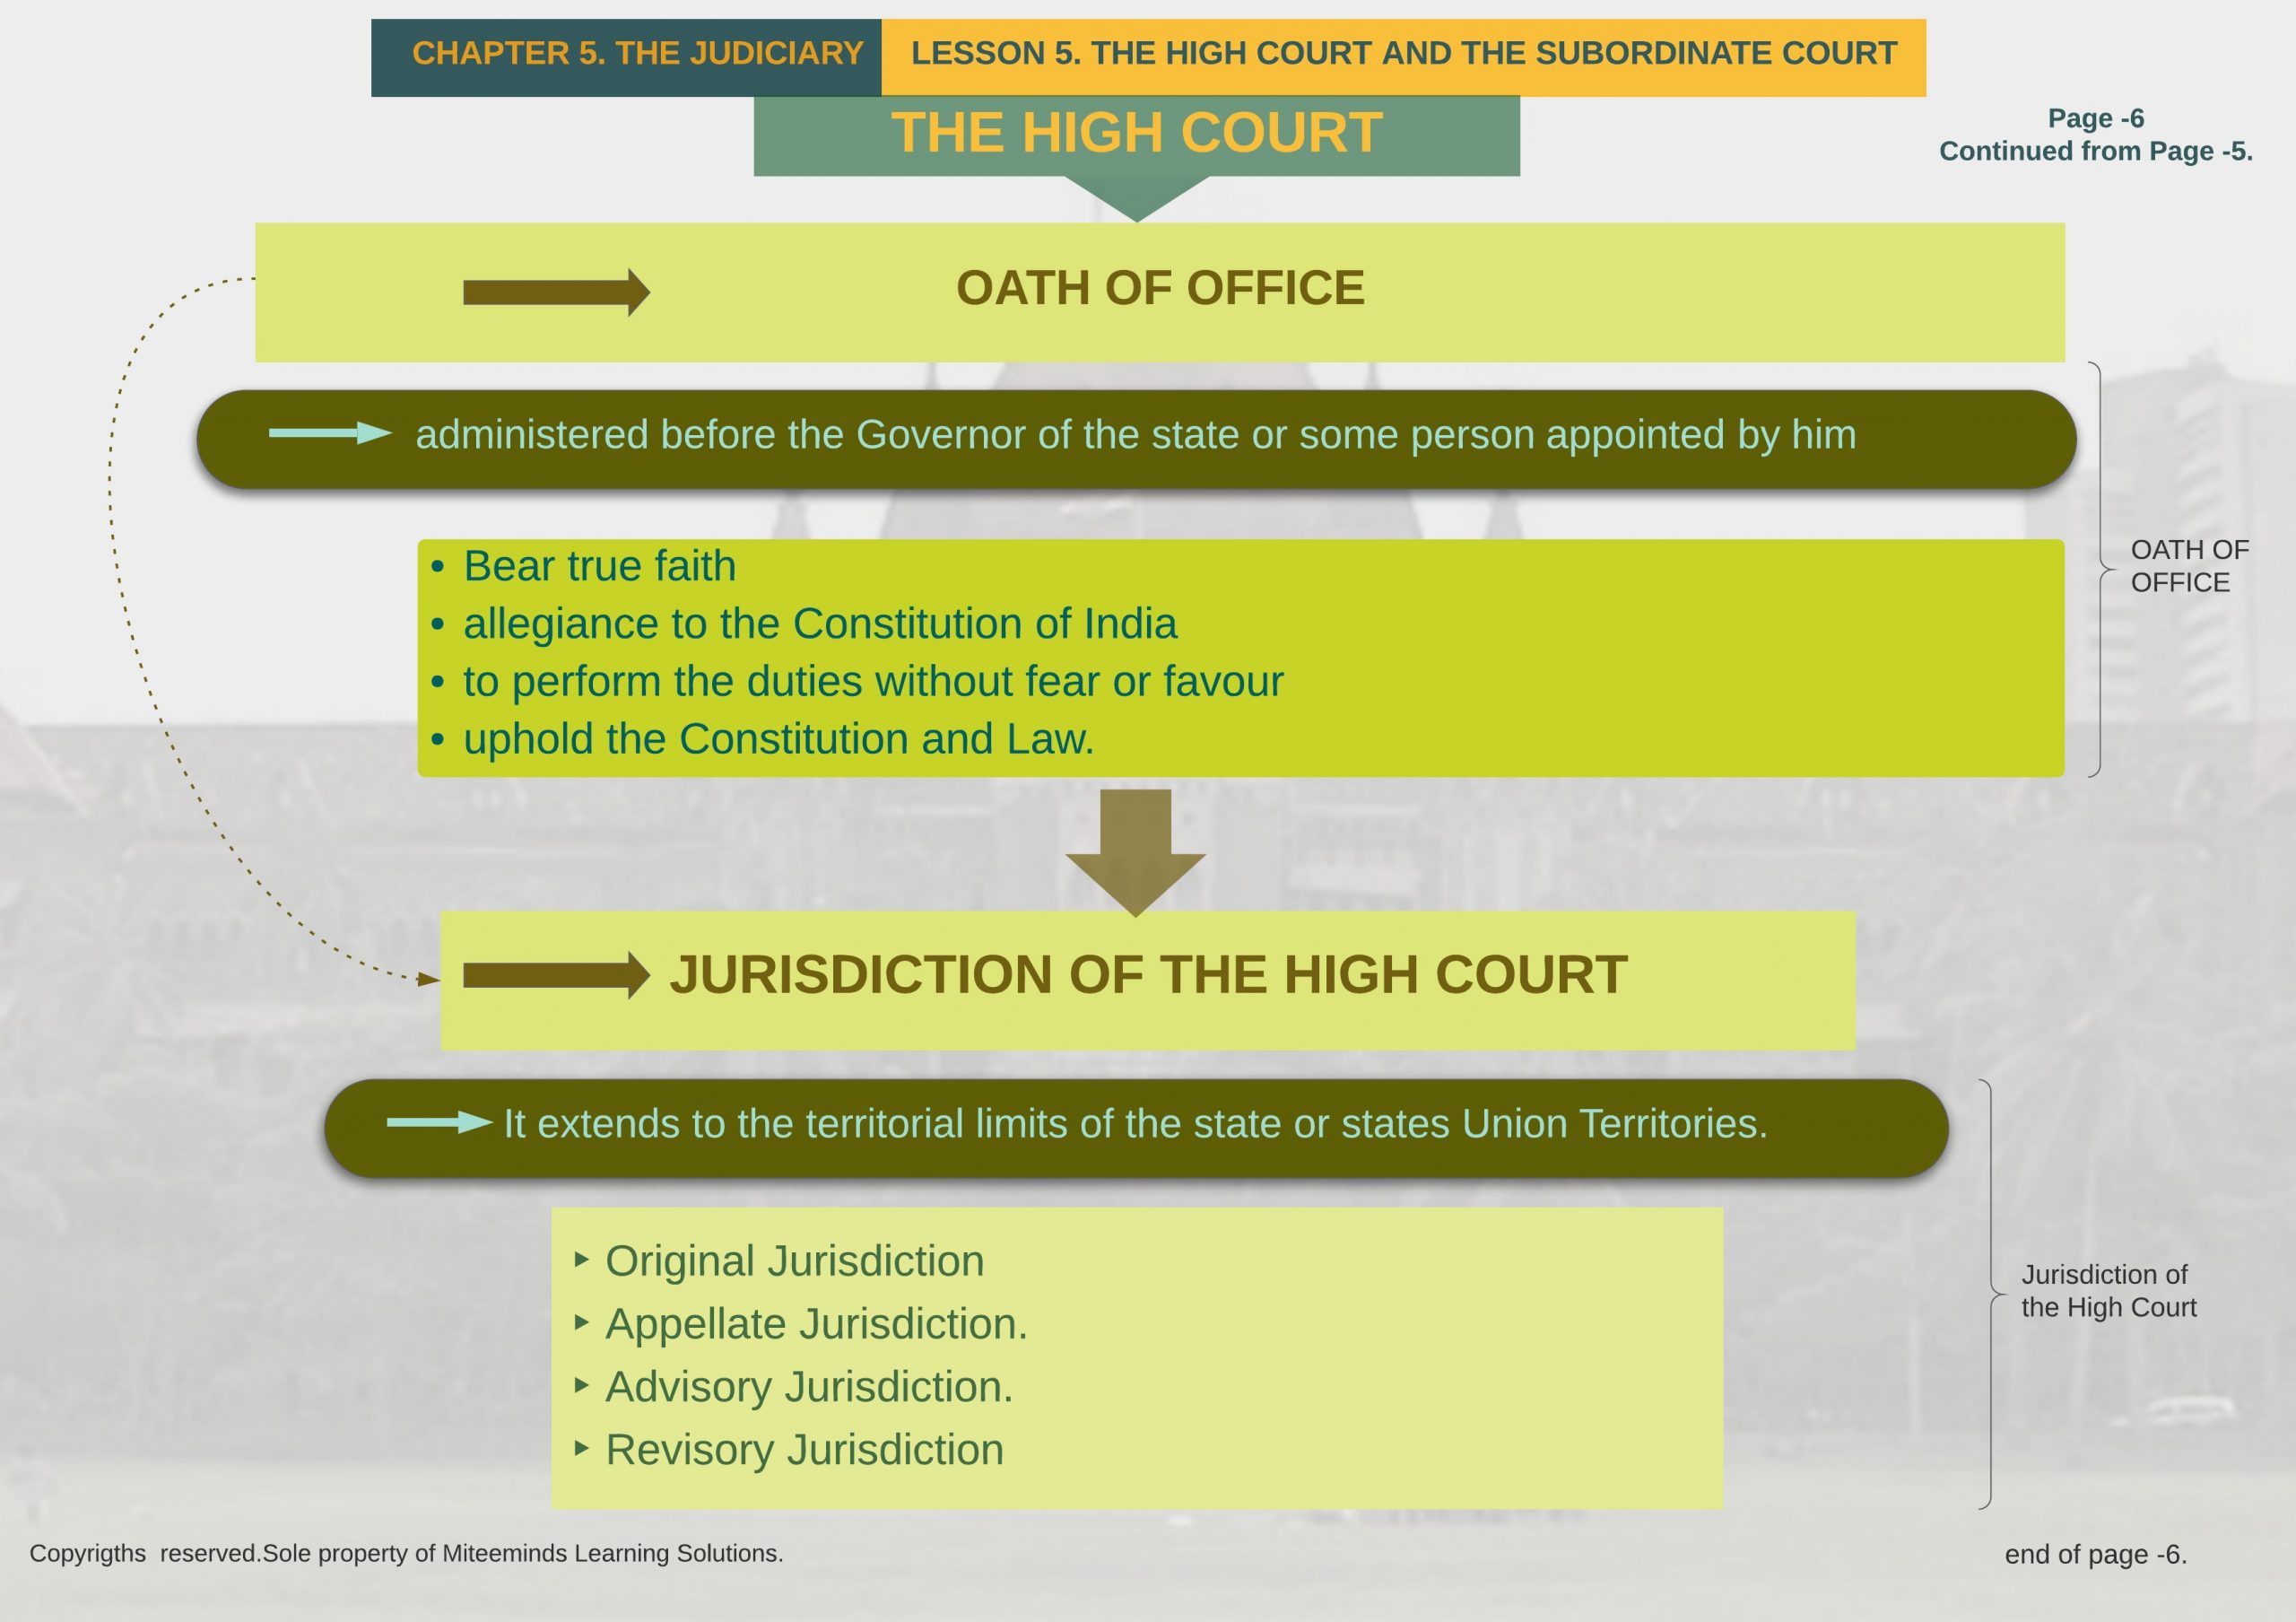 Oath of Office and Jurisdiction scaled